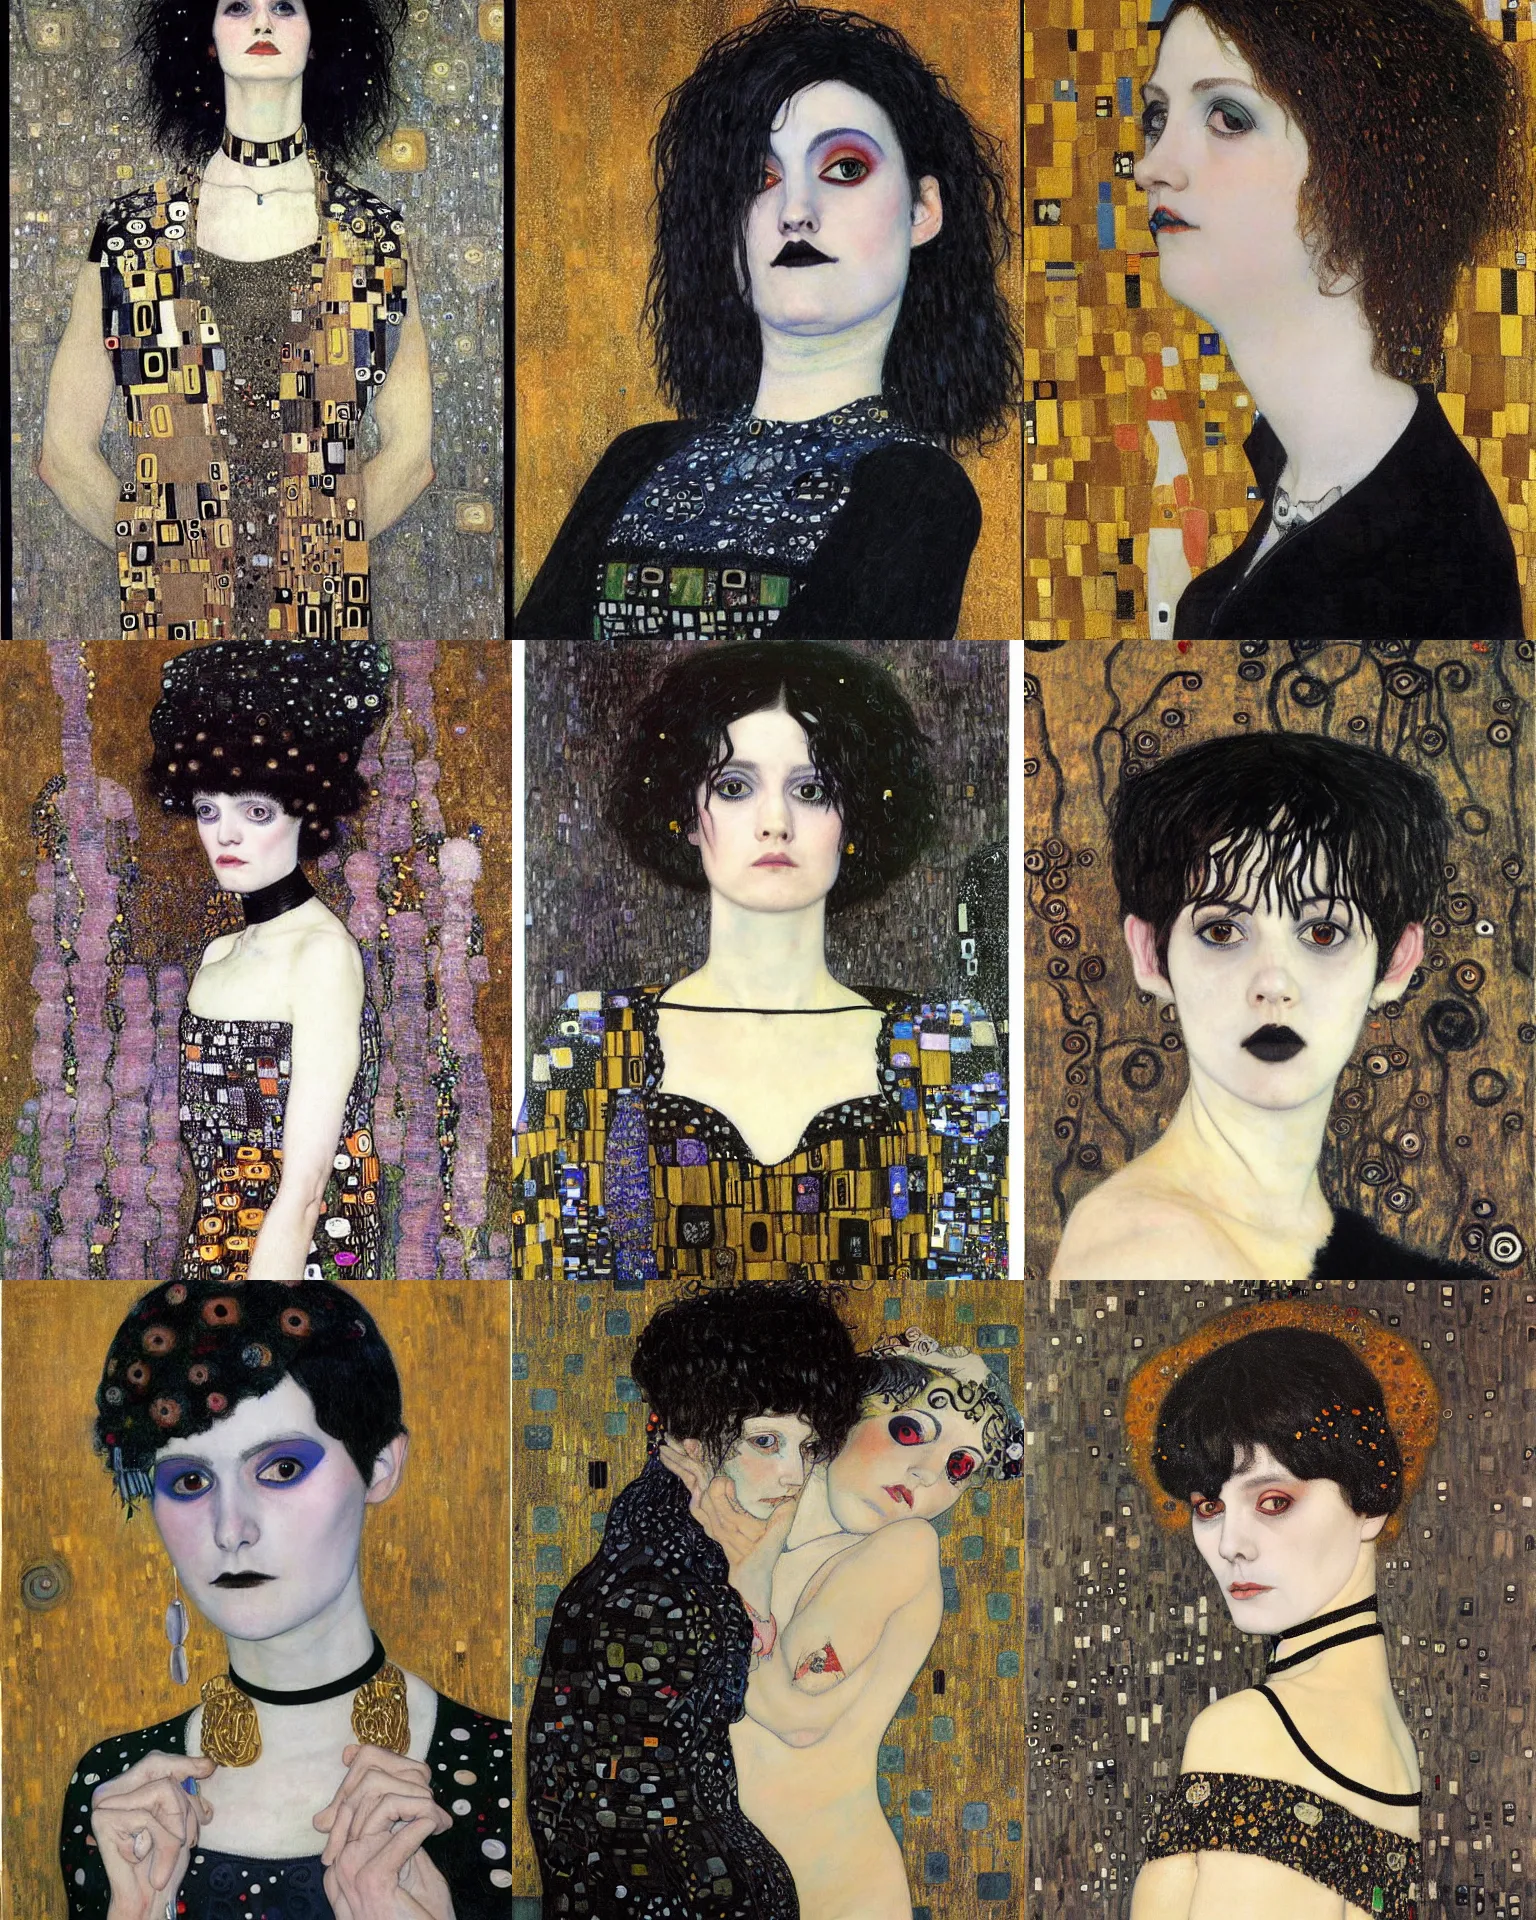 Prompt: A goth portrait painted by Gustav Klimt. Her hair is dark brown and cut into a short, messy pixie cut. She has a slightly rounded face, with a pointed chin, large entirely-black eyes, and a small nose. She is wearing a black tank top, a black leather jacket, a black knee-length skirt, a black choker, and black leather boots.